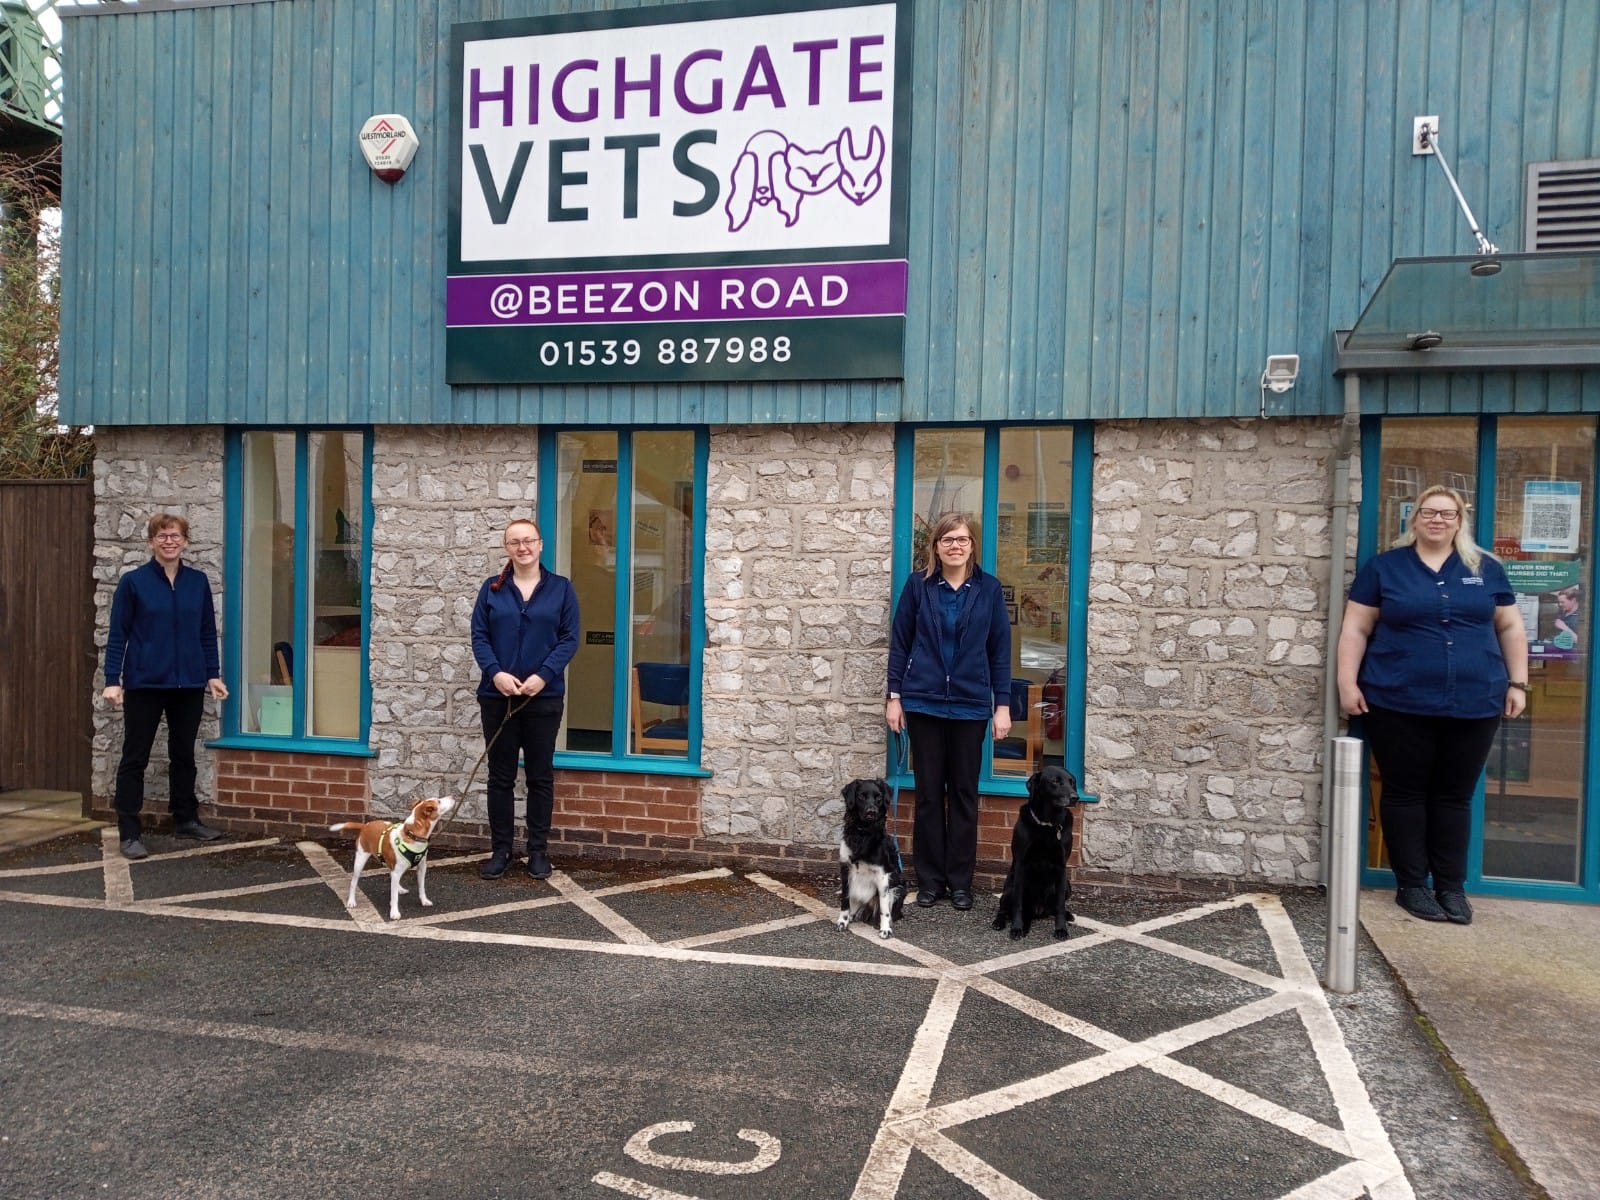 Highgate Vets Practice of the Year Finalists